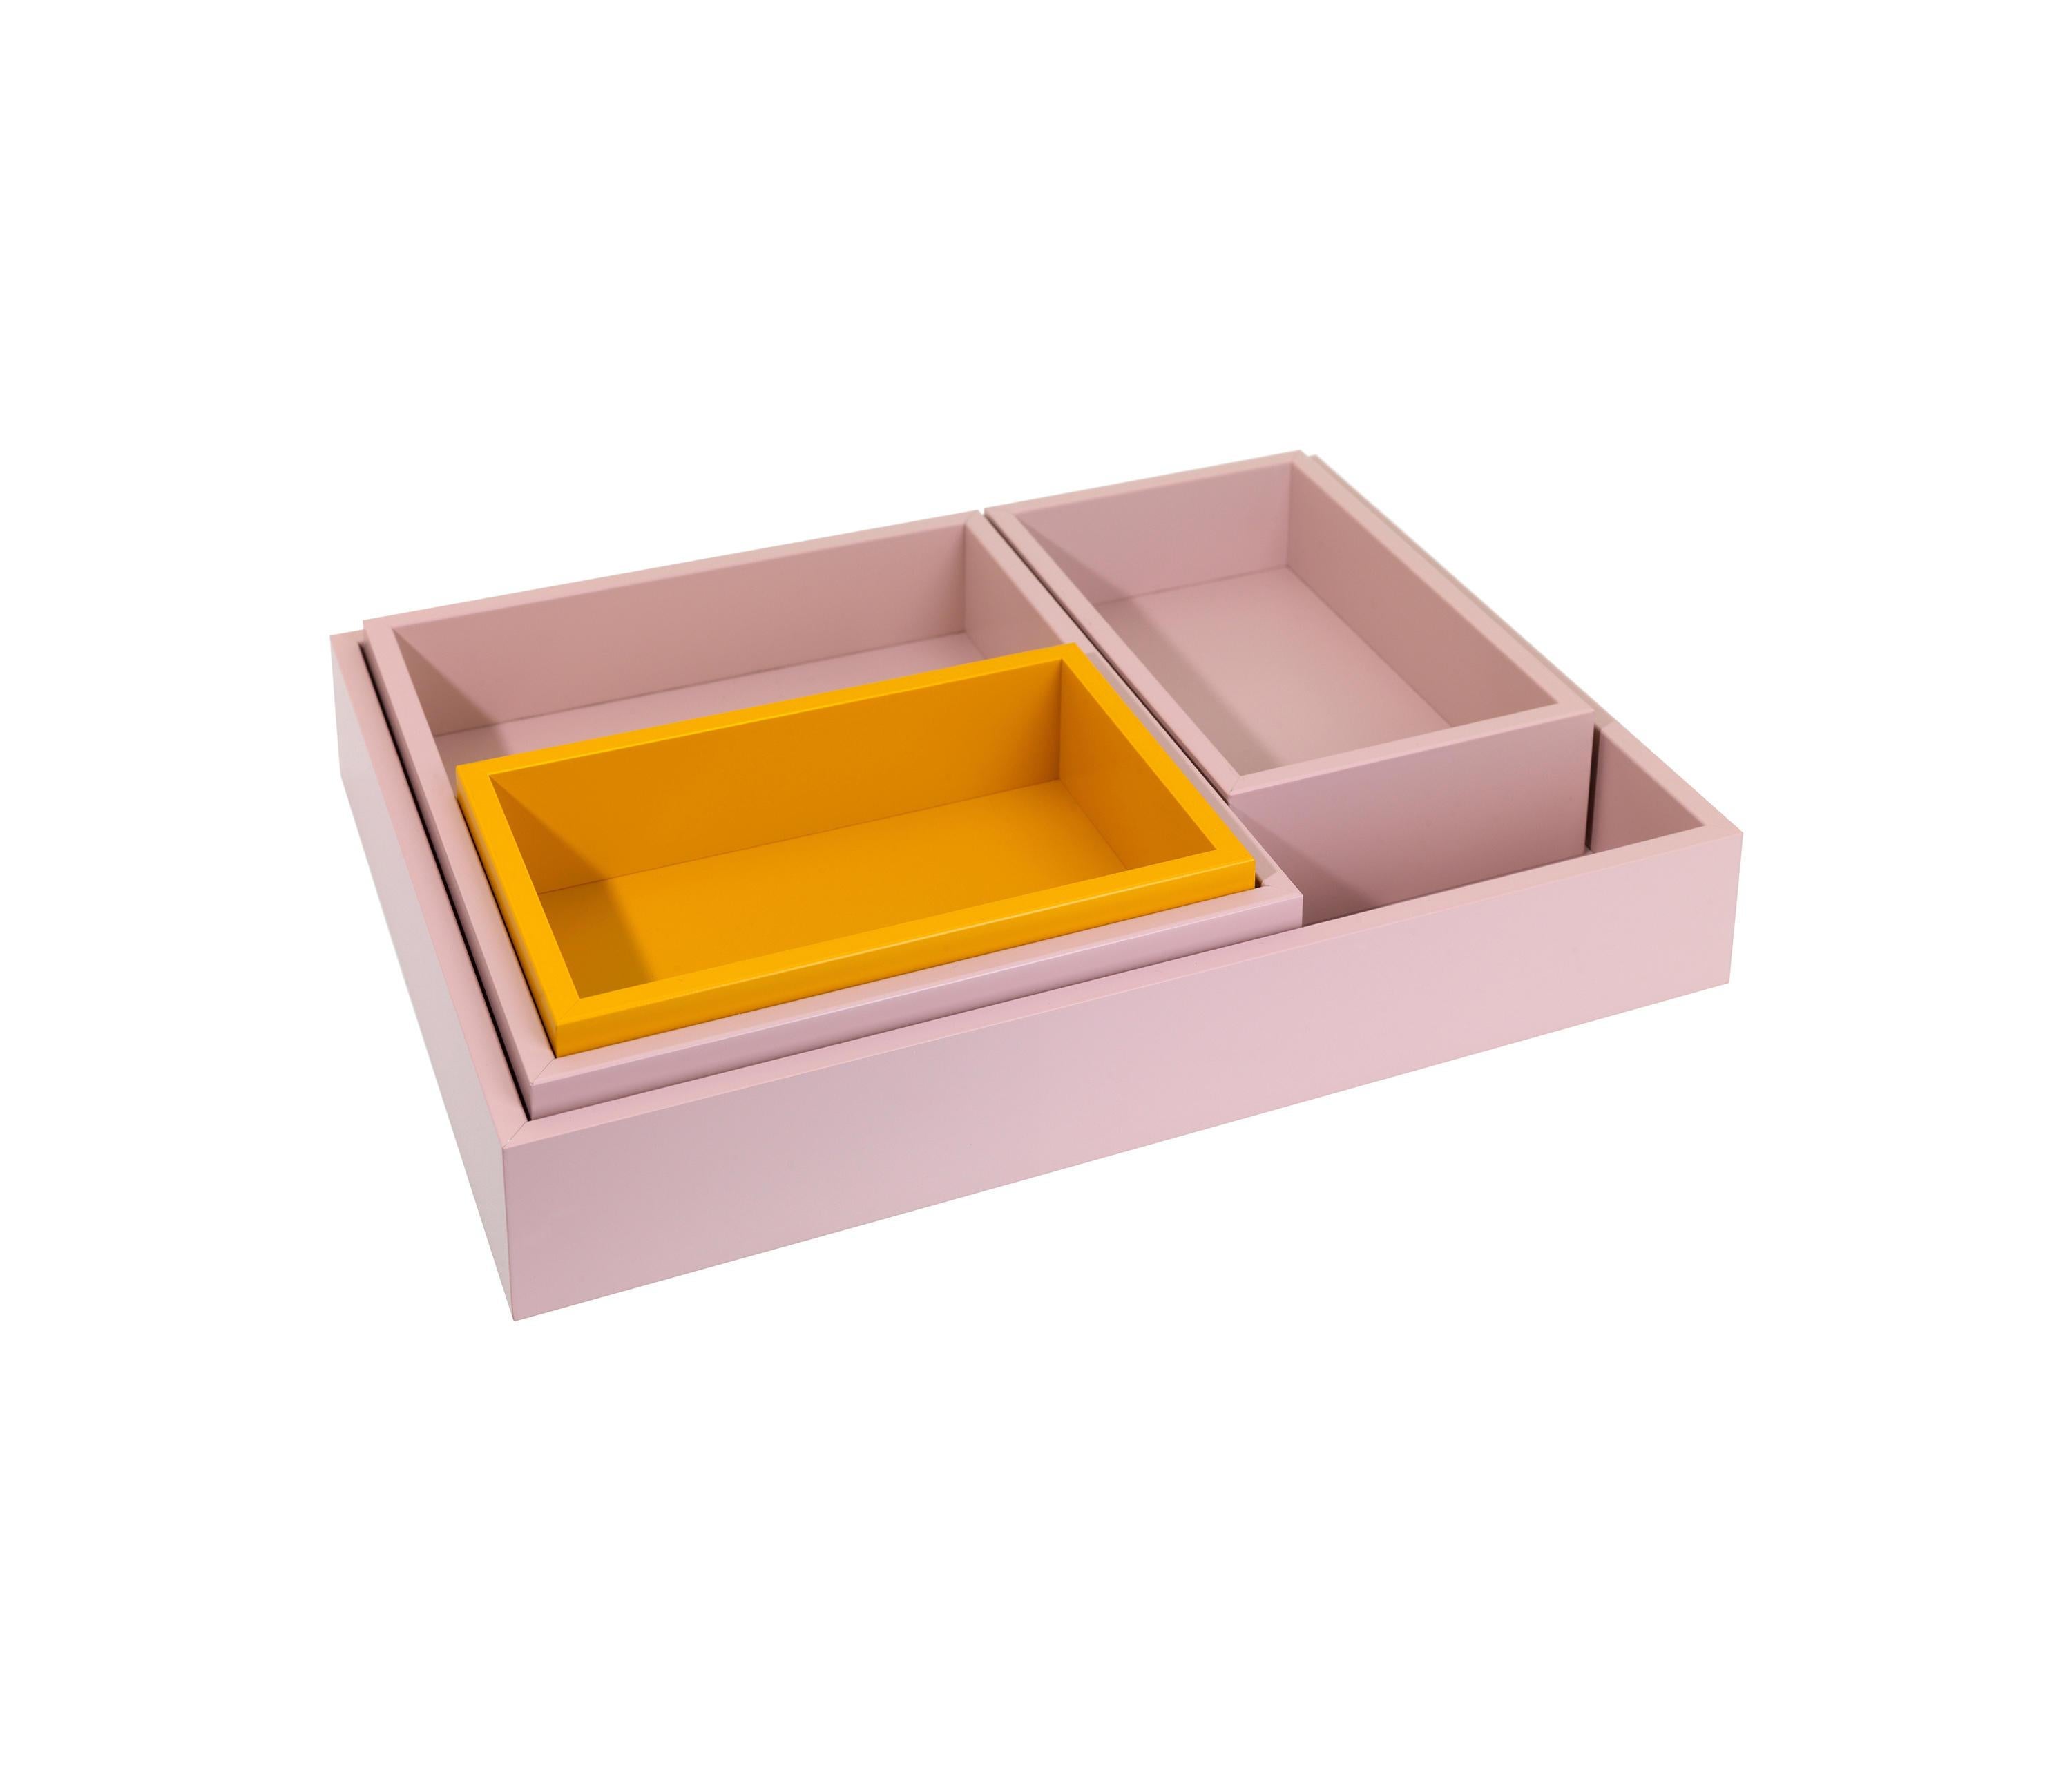 NEW Schonbuch Dusky rose
TALLY is a versatile tray and comes in a choice of interesting lacquer colours and three different sizes. Alone or in a group, side by side or one inside the other, TALLY offers inspiration for creative arrangements and